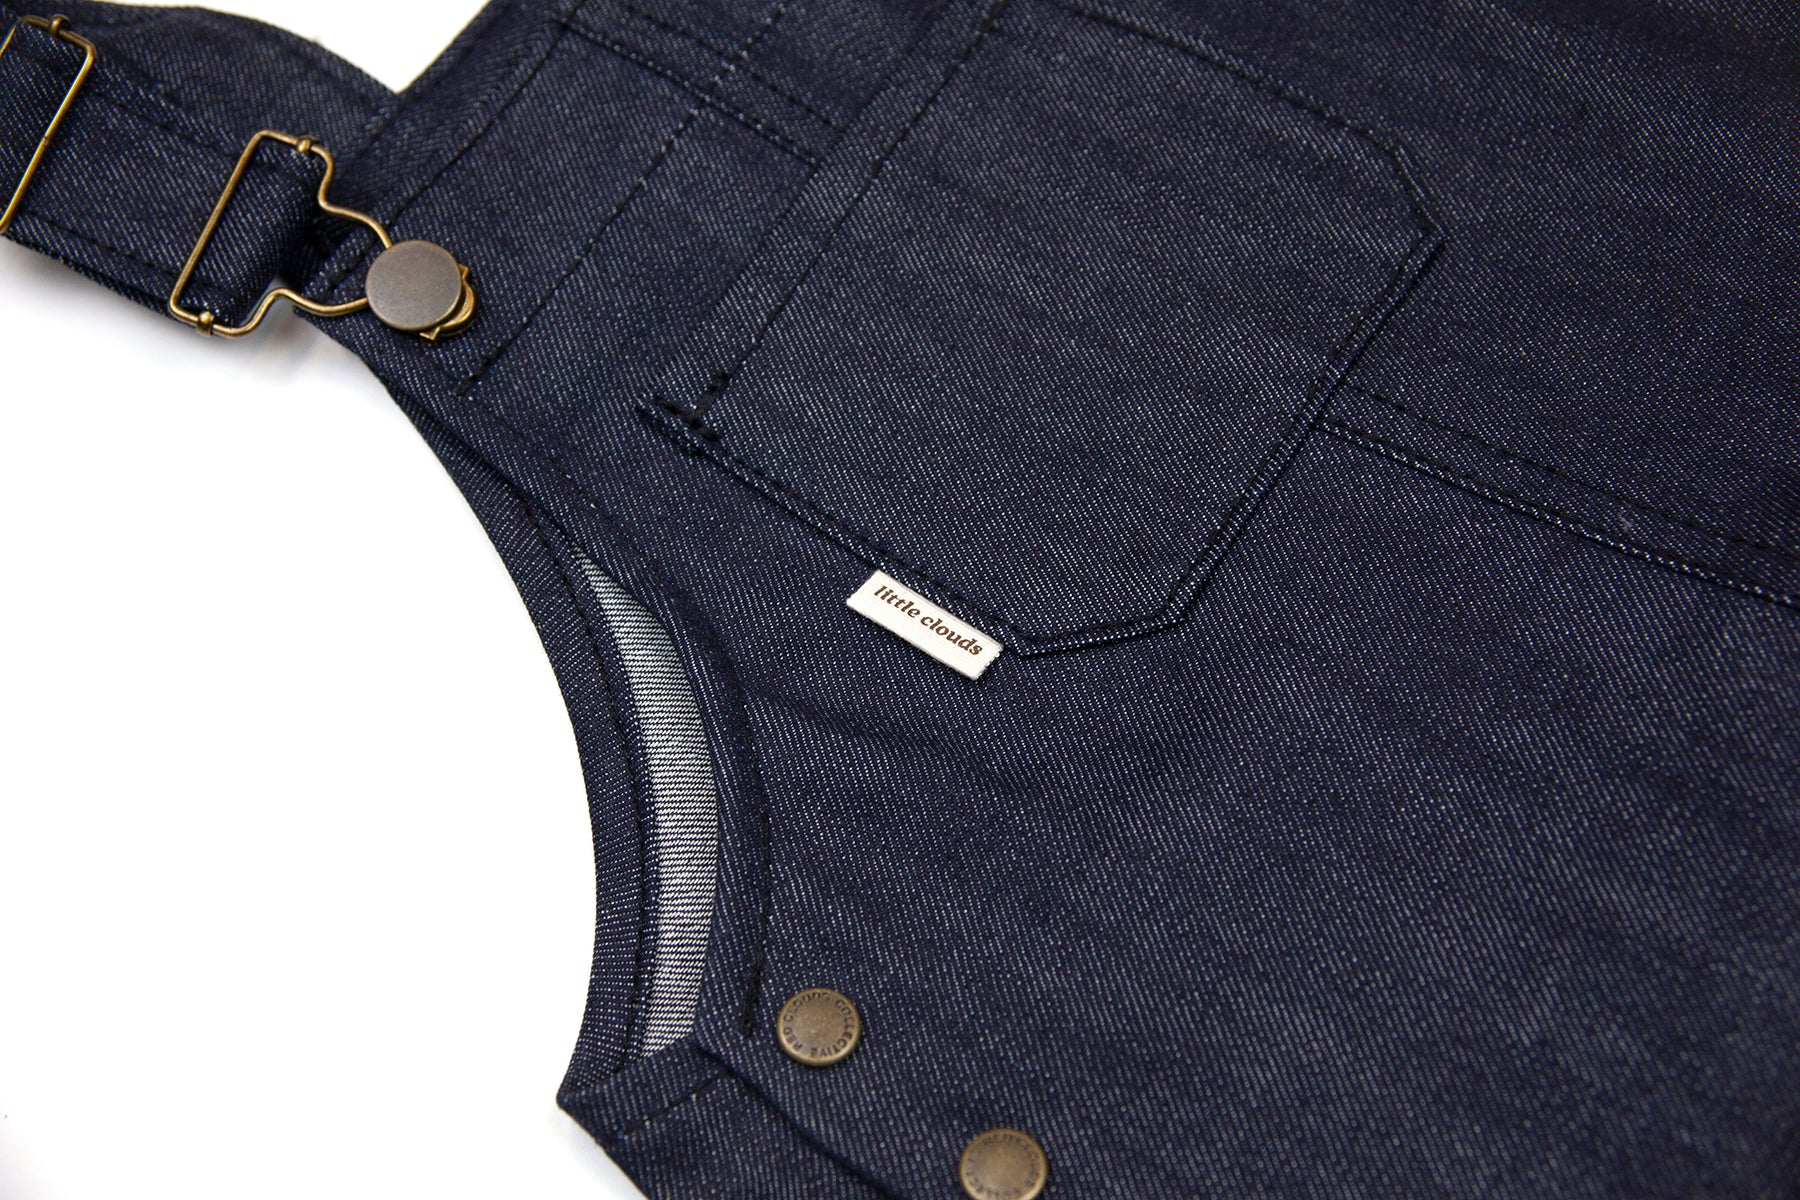 Little Clouds Overalls - Selvage Denim